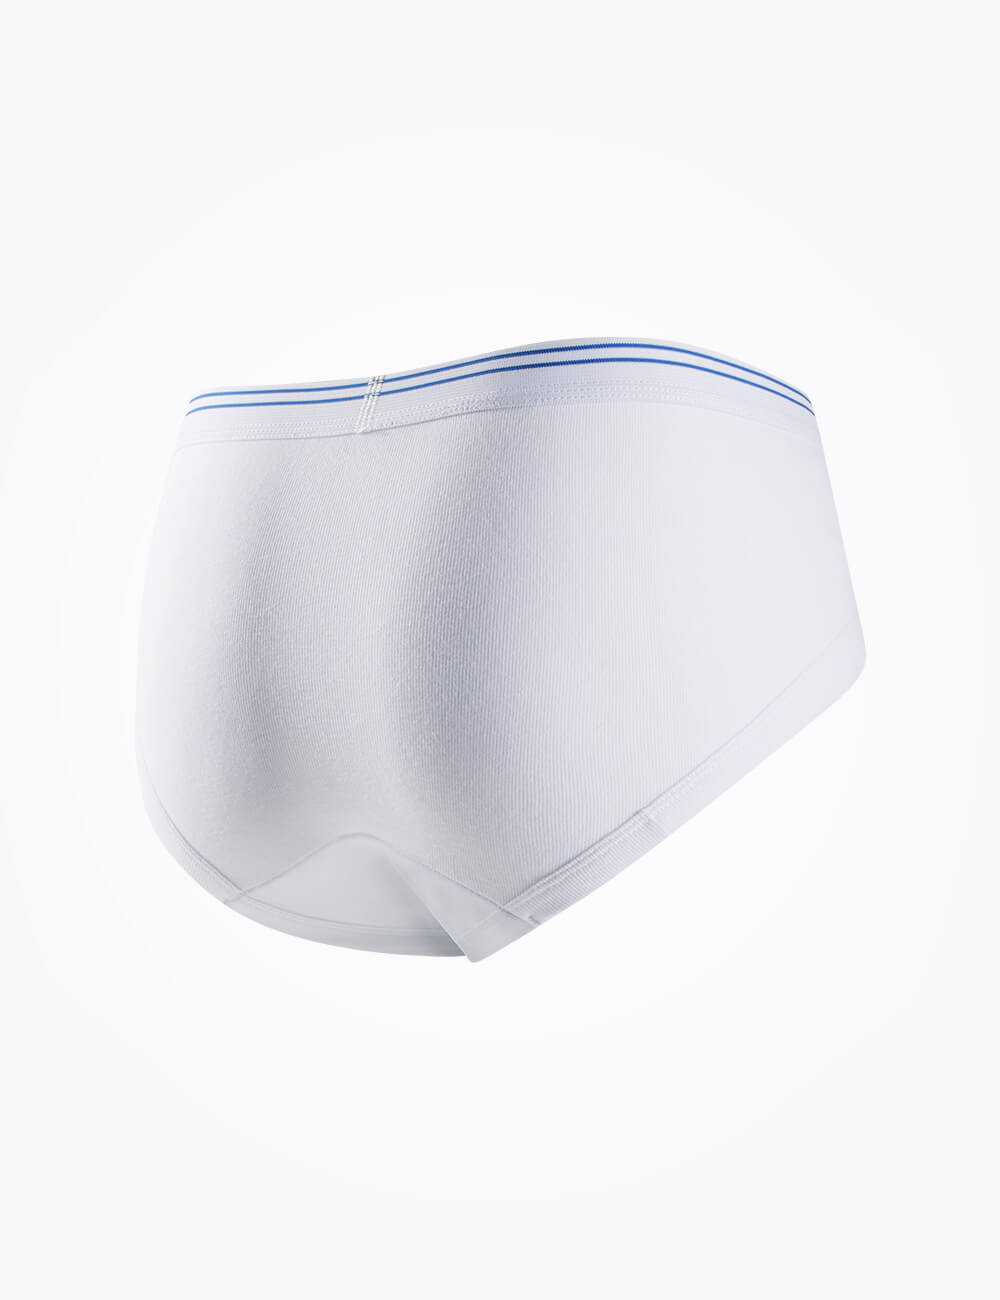 Petey's Washable Incontinence Underwear for Men, Moderate